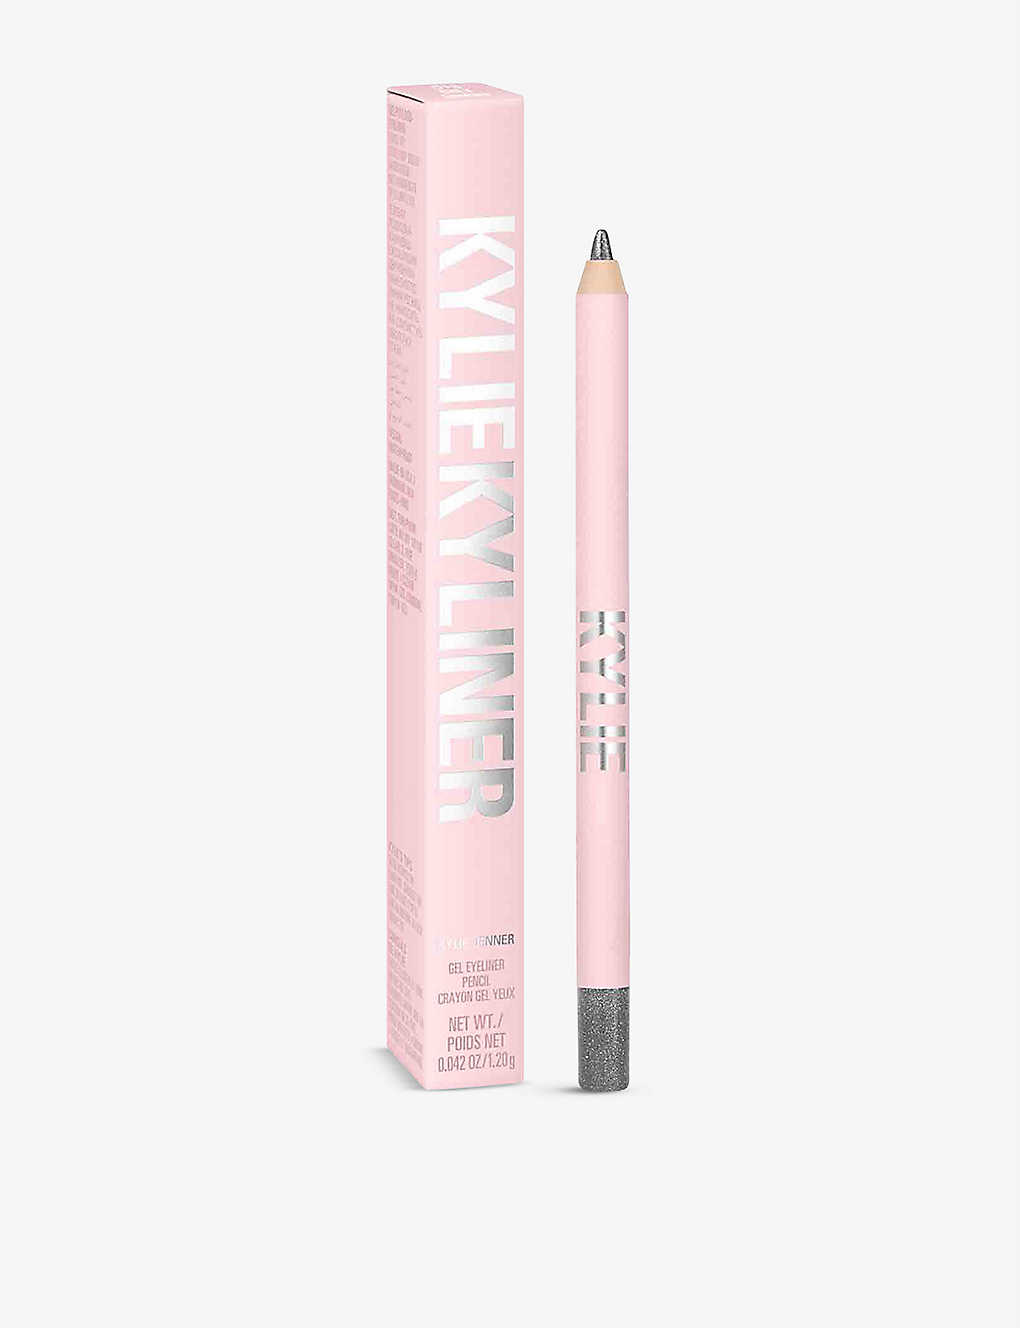 Kylie By Kylie Jenner Kyliner Gel Pencil 4.25g In 013 Shimmery Grey